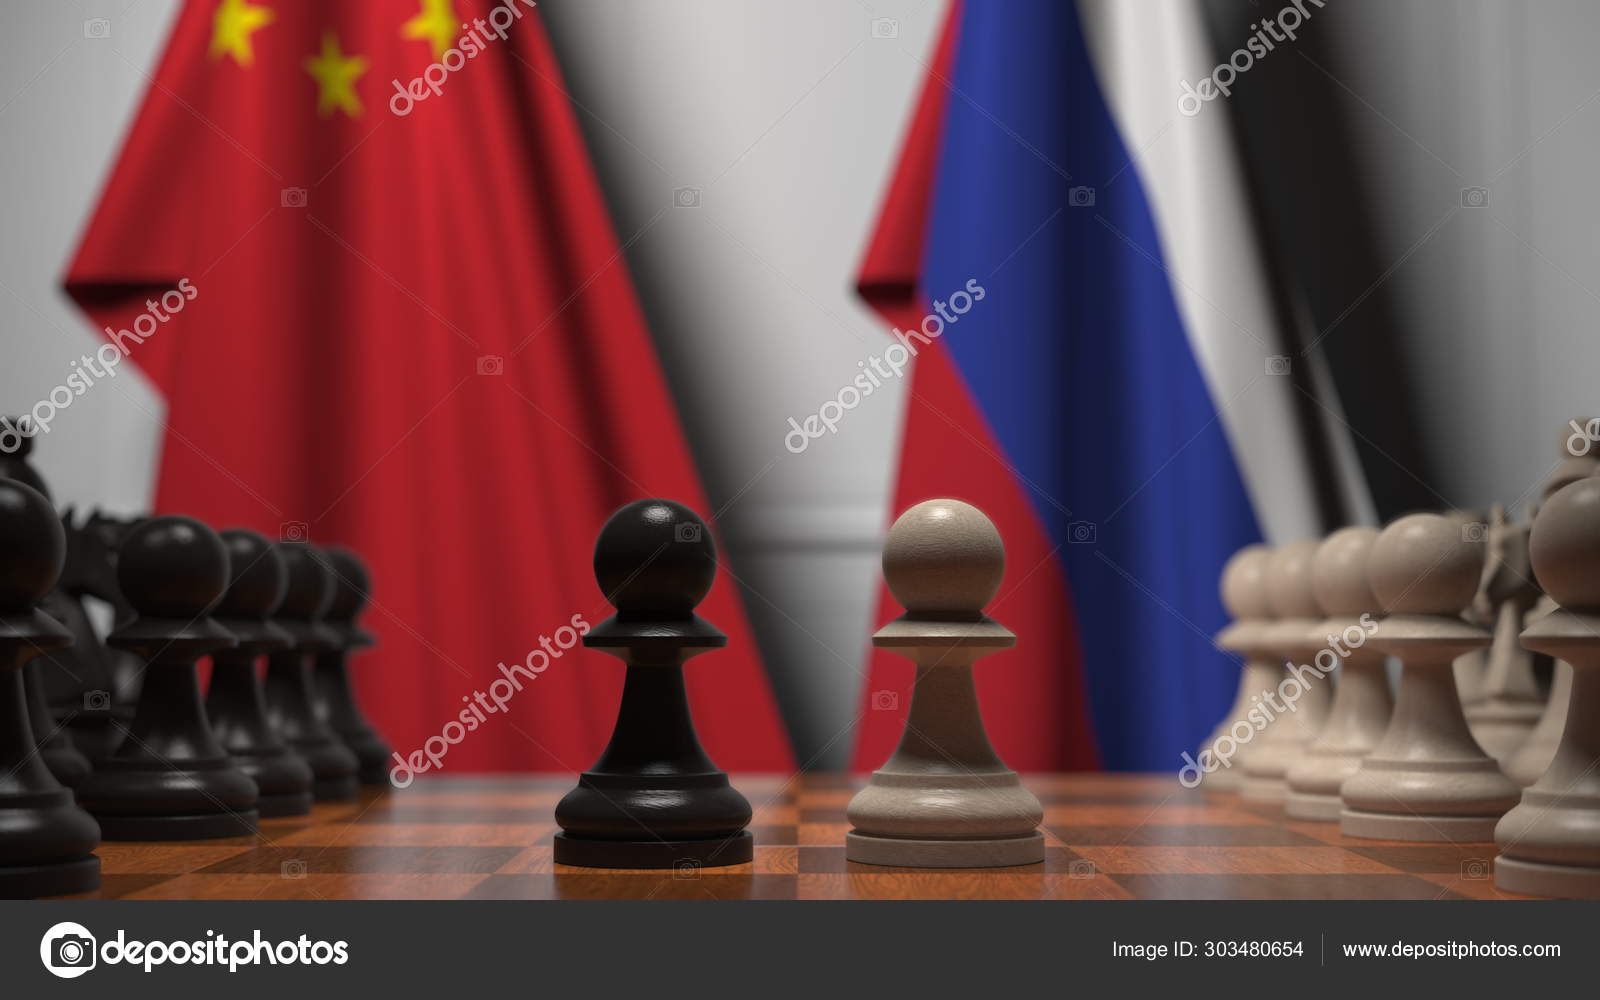 How chess became a pawn in Russia's political war games